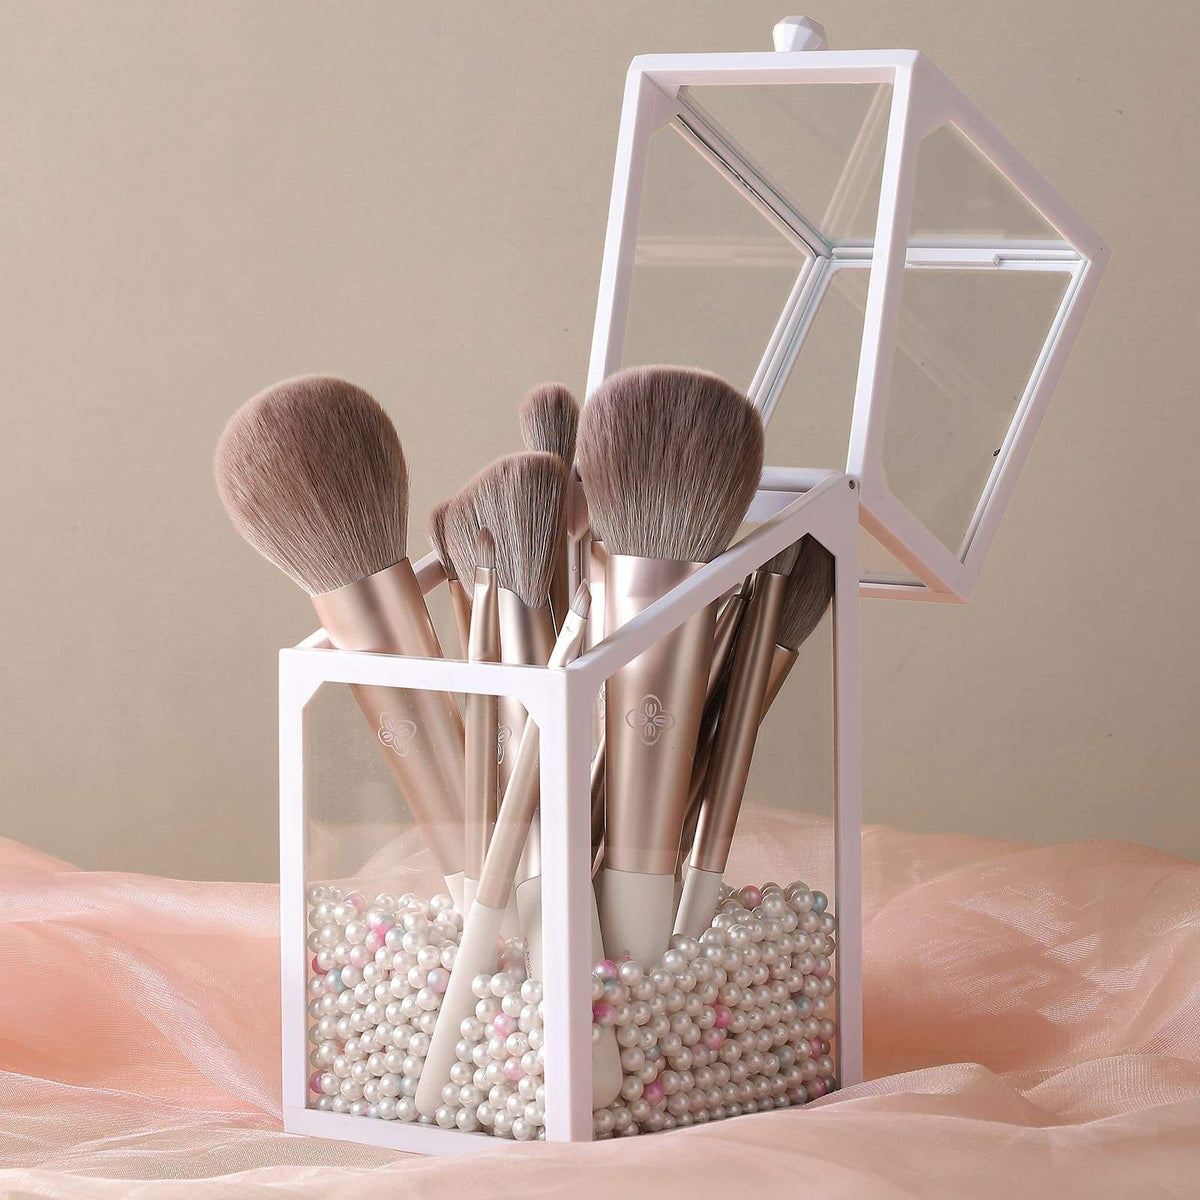 Review: Noelle Makeup Brush 19 and Makeup Brush Case - Adjusting Beauty